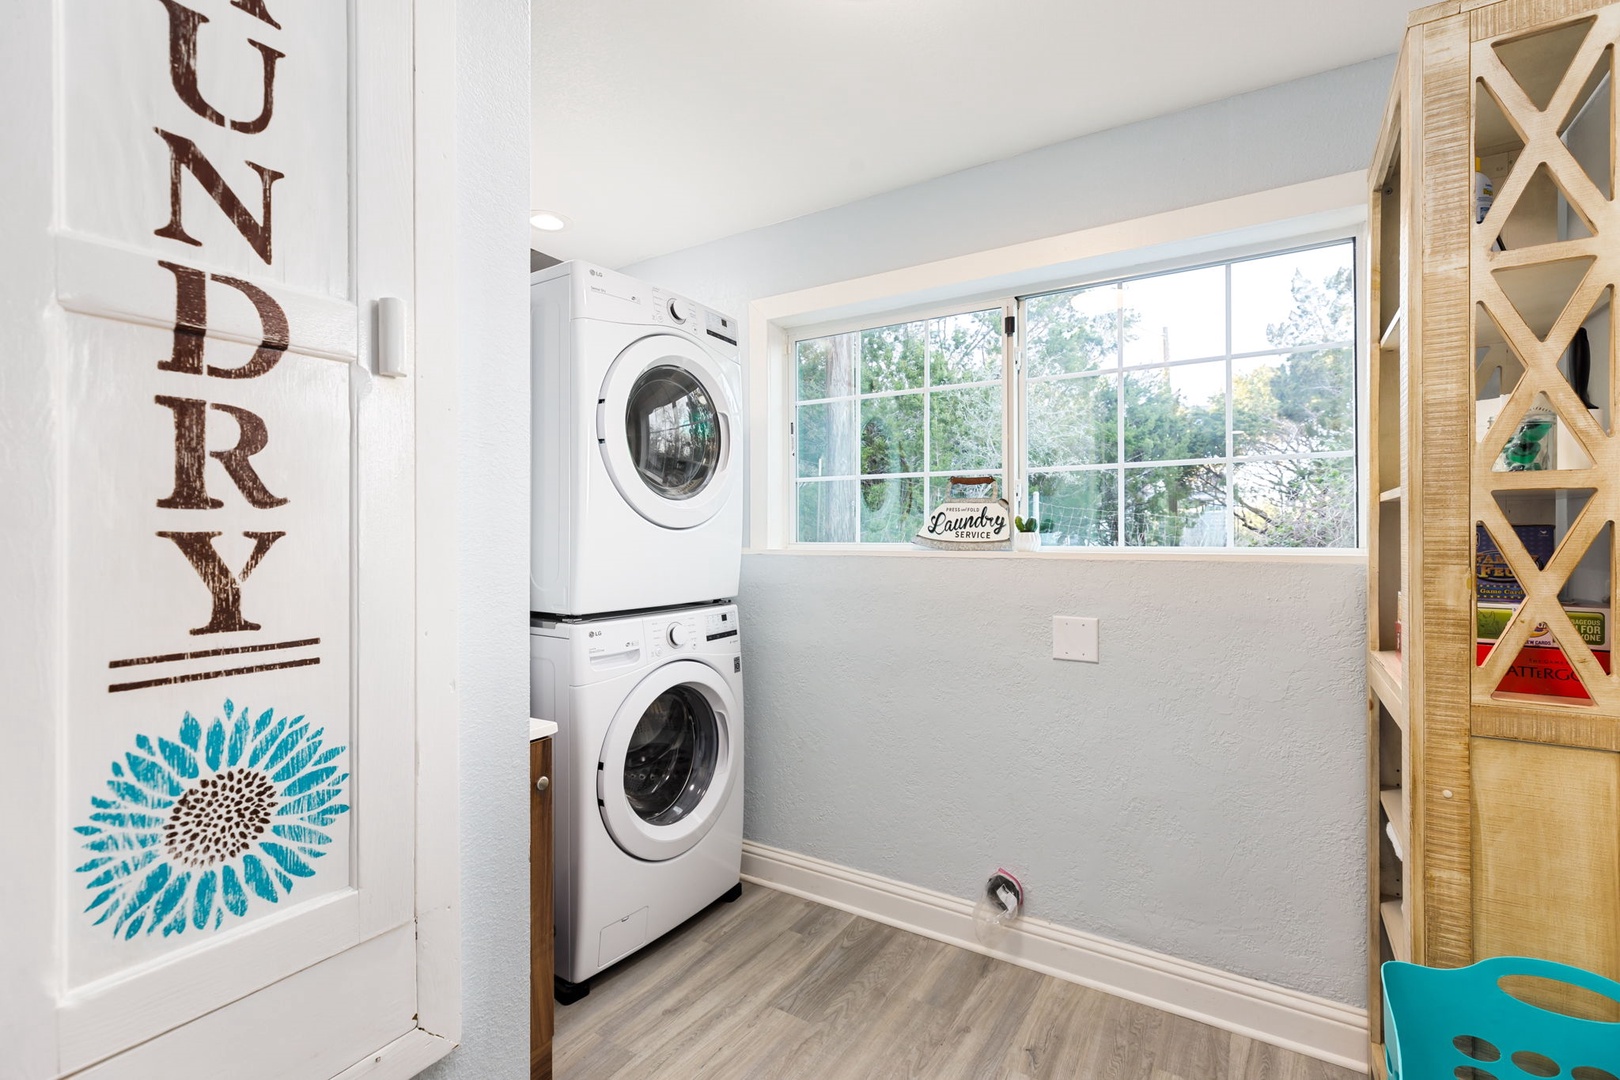 Private laundry is available for your stay, tucked away in the laundry room